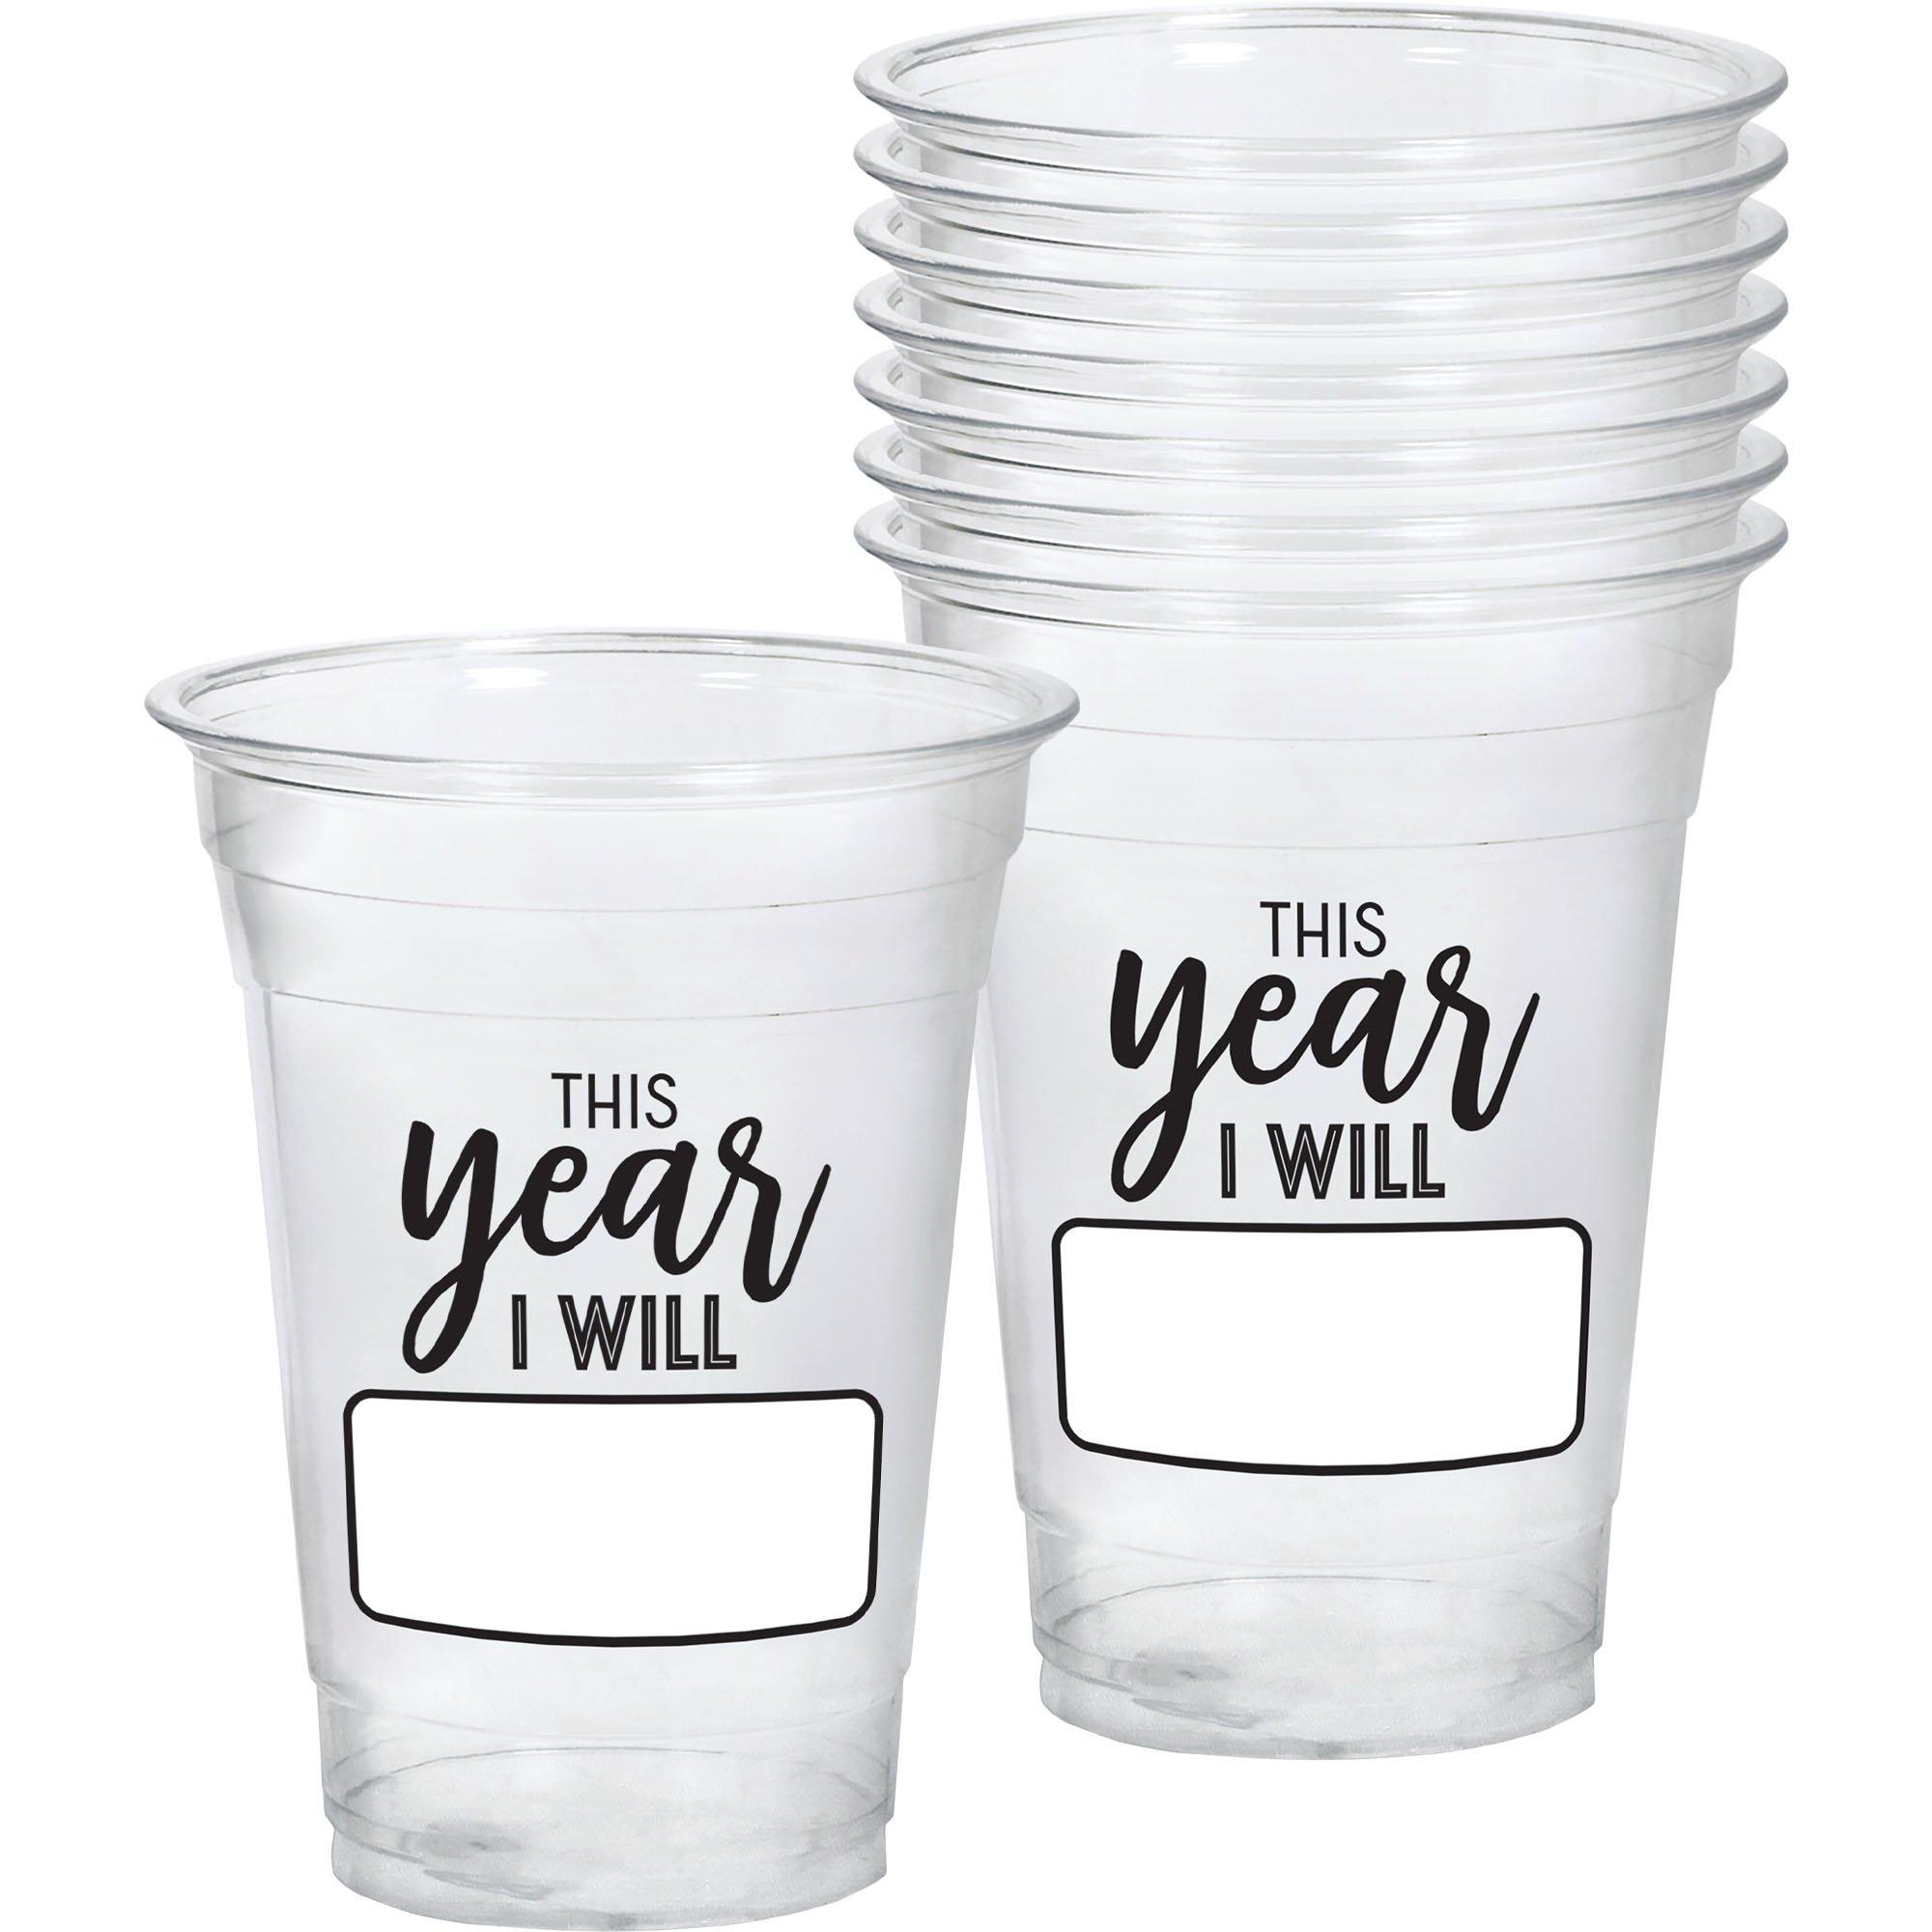 12oz. Plastic Cups by Celebrate It™ Entertaining, 16ct.